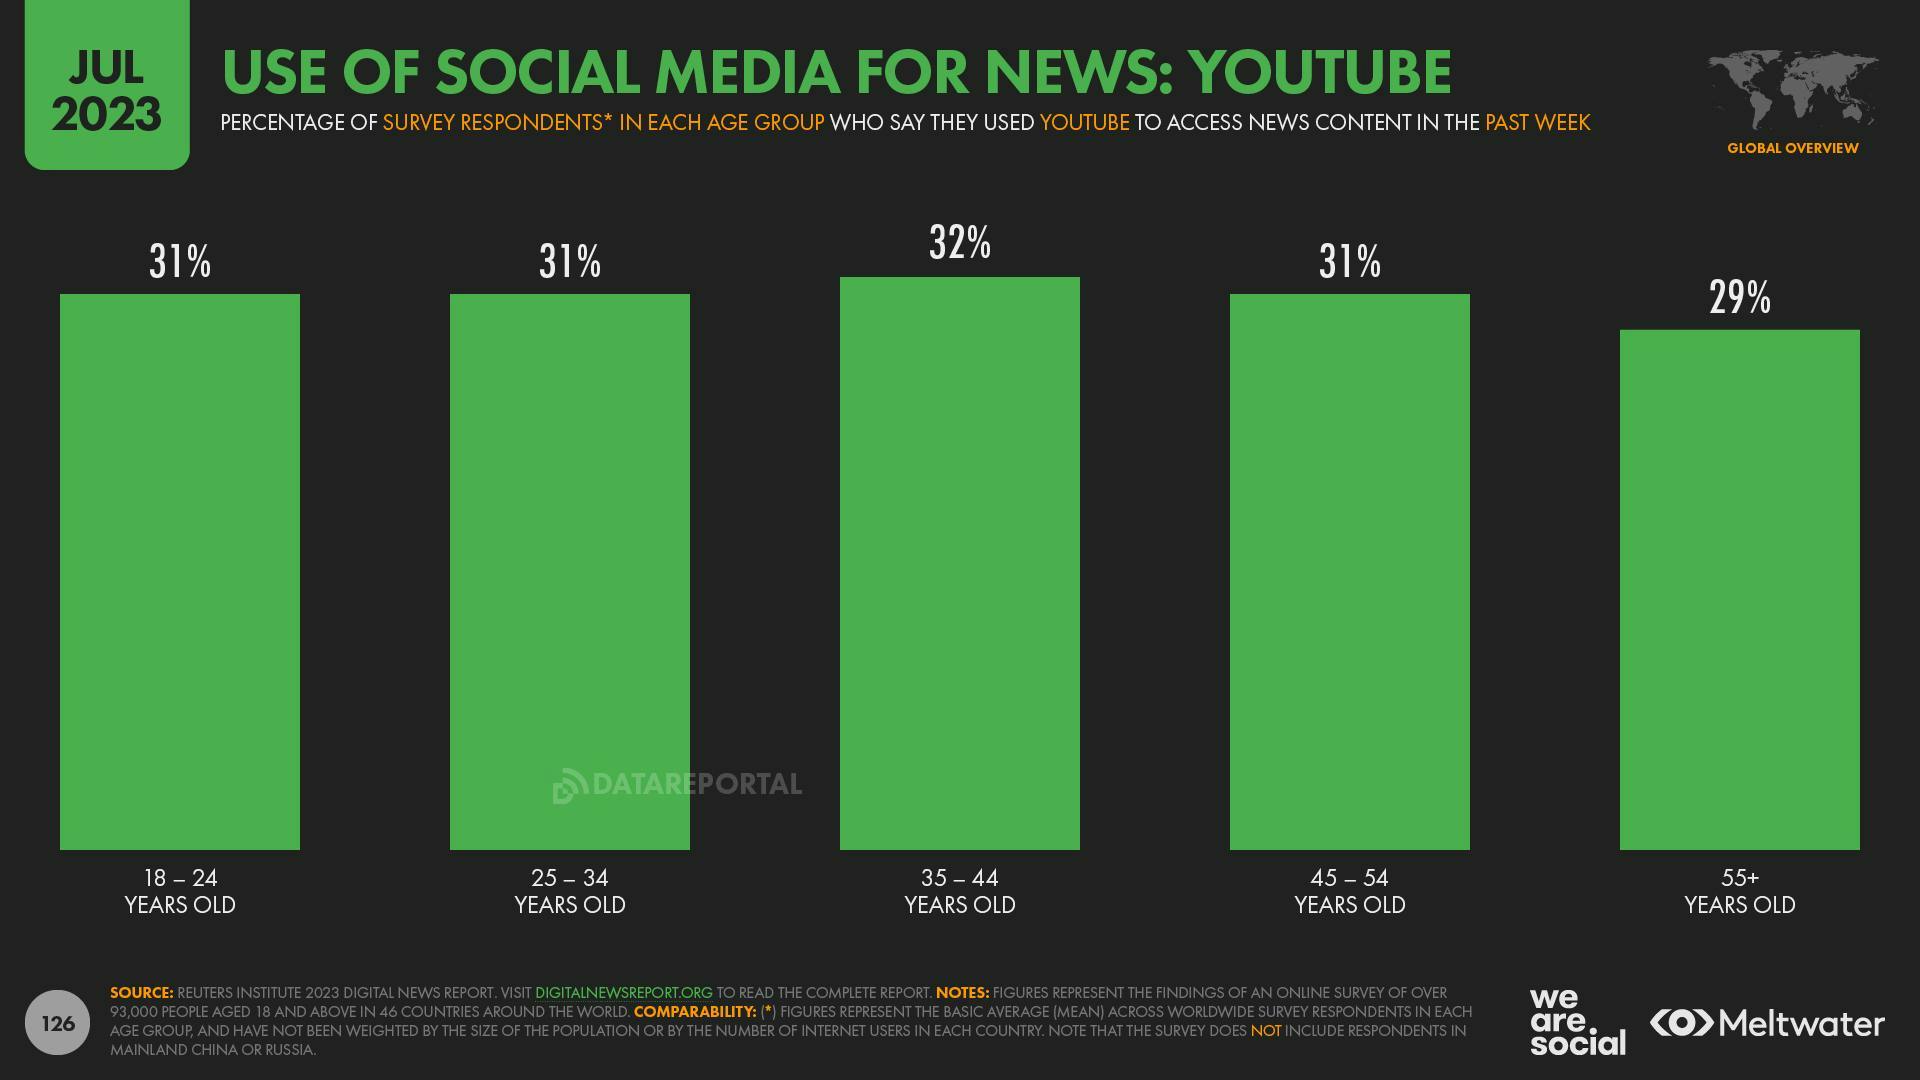 A bar chart showing use of YouTube for news across age groups, with the highest proportion being 32% of 35- to 44-year olds, according to RISJ survey data.